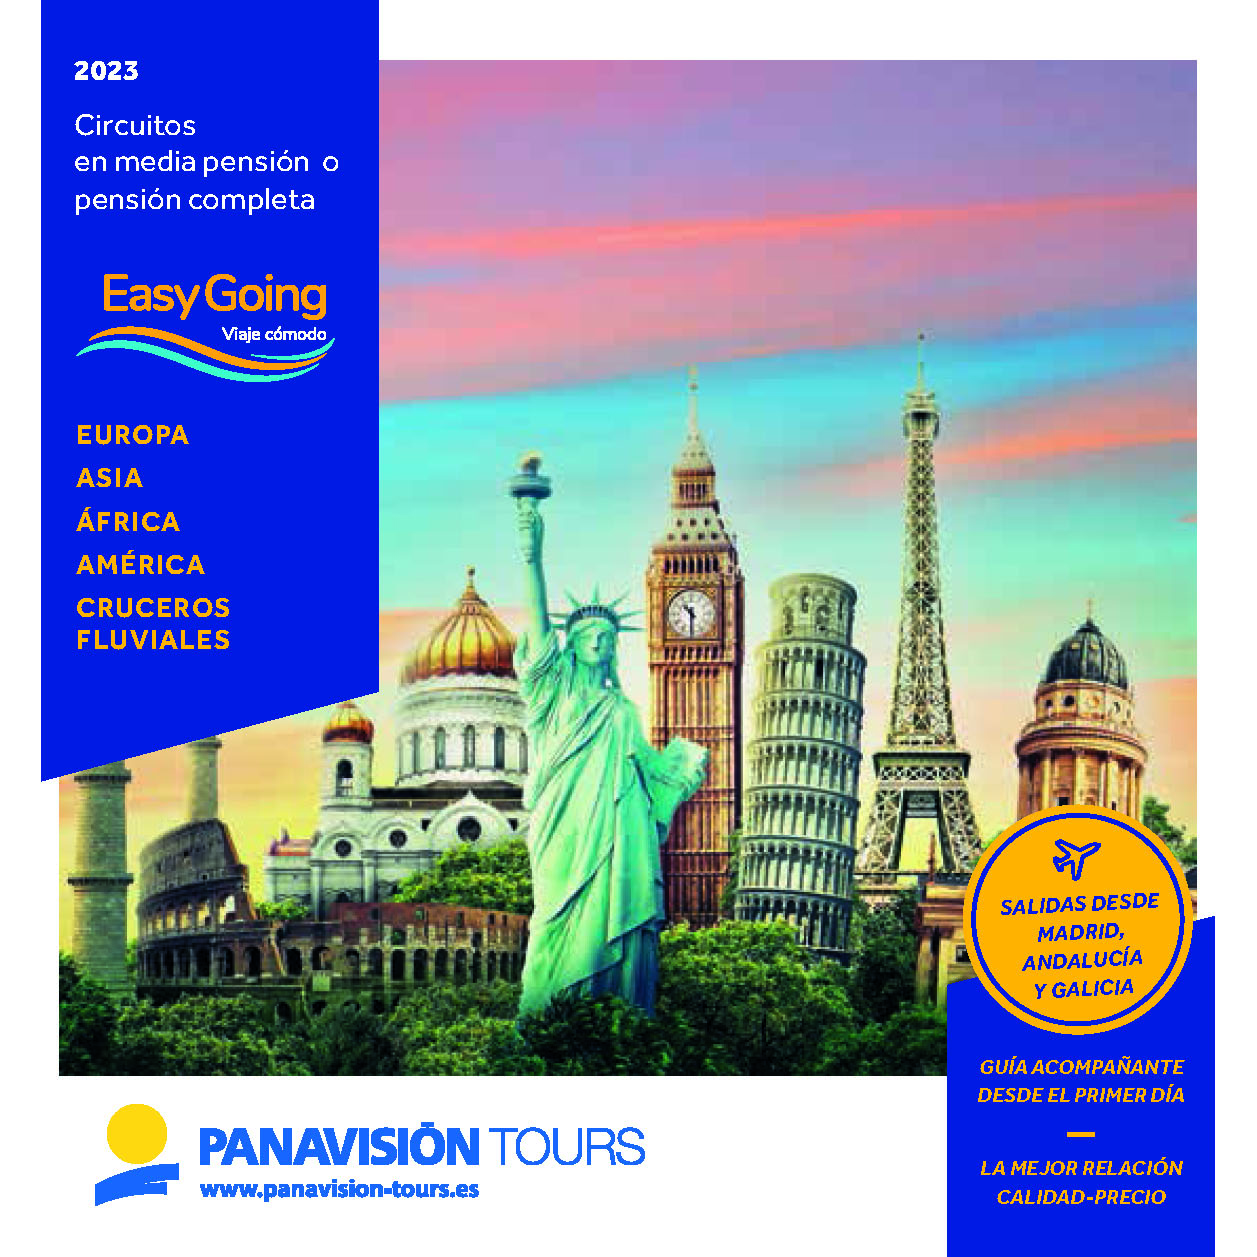 Catalogo Panavision Tours Circuitos Easy Going Europa Asia Africa America y Cruceros Fluviales 2023